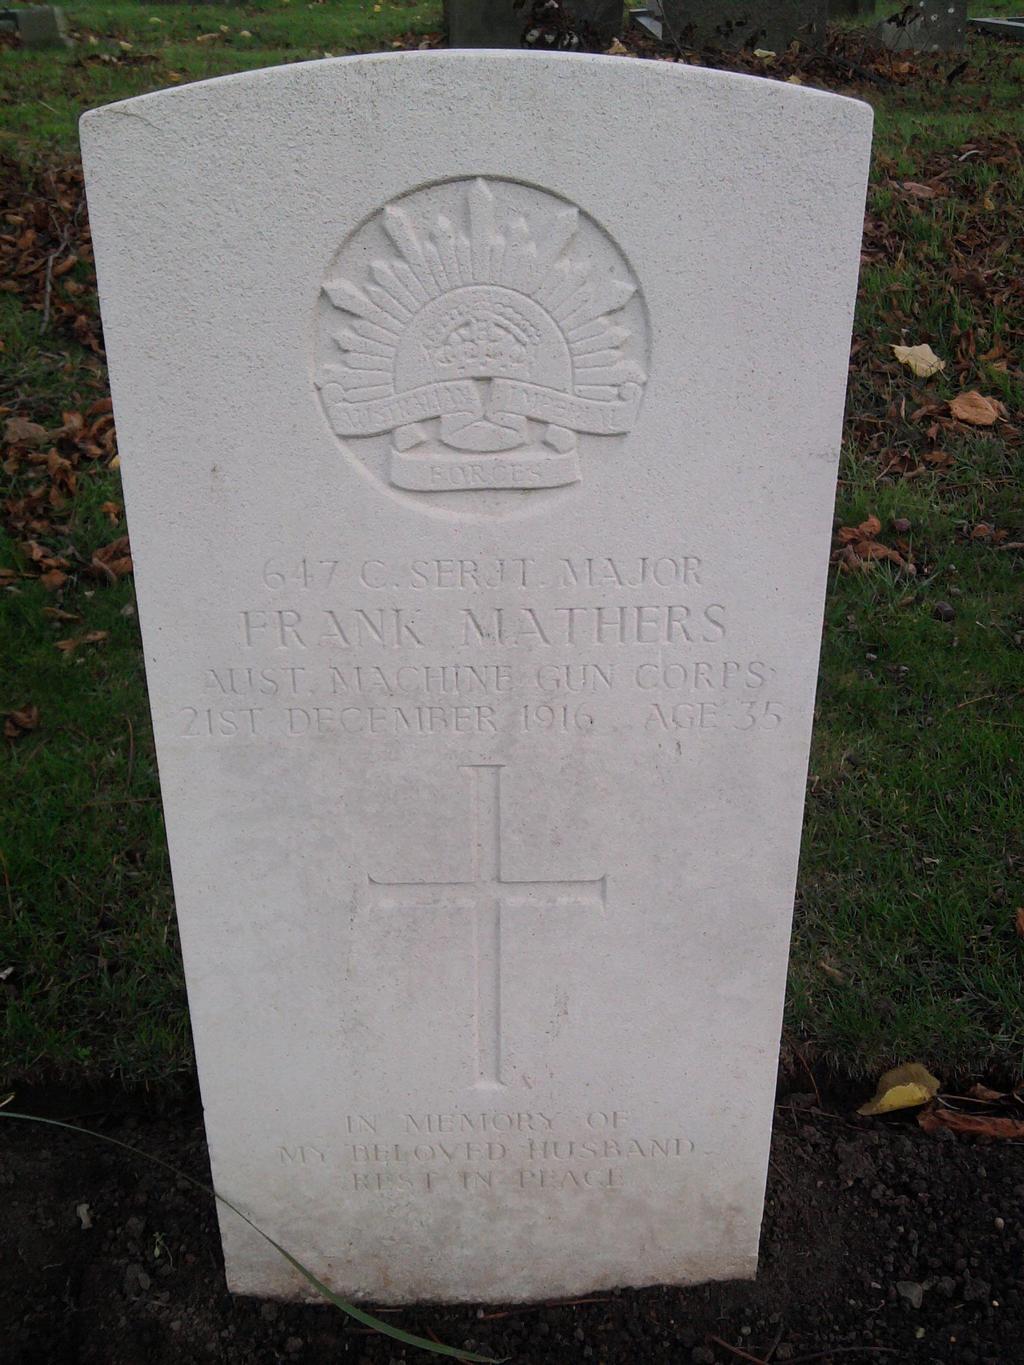 Photo of C. Serjt. Major Frank Mathers Commonwealth War Graves Commission Headstone in Grantham Cemetery, Grantham, Lincolnshire, England. (*Note At the time of researching C.S.M. Mathers headstone had the incorrect date of death as 21 st December, 1916.